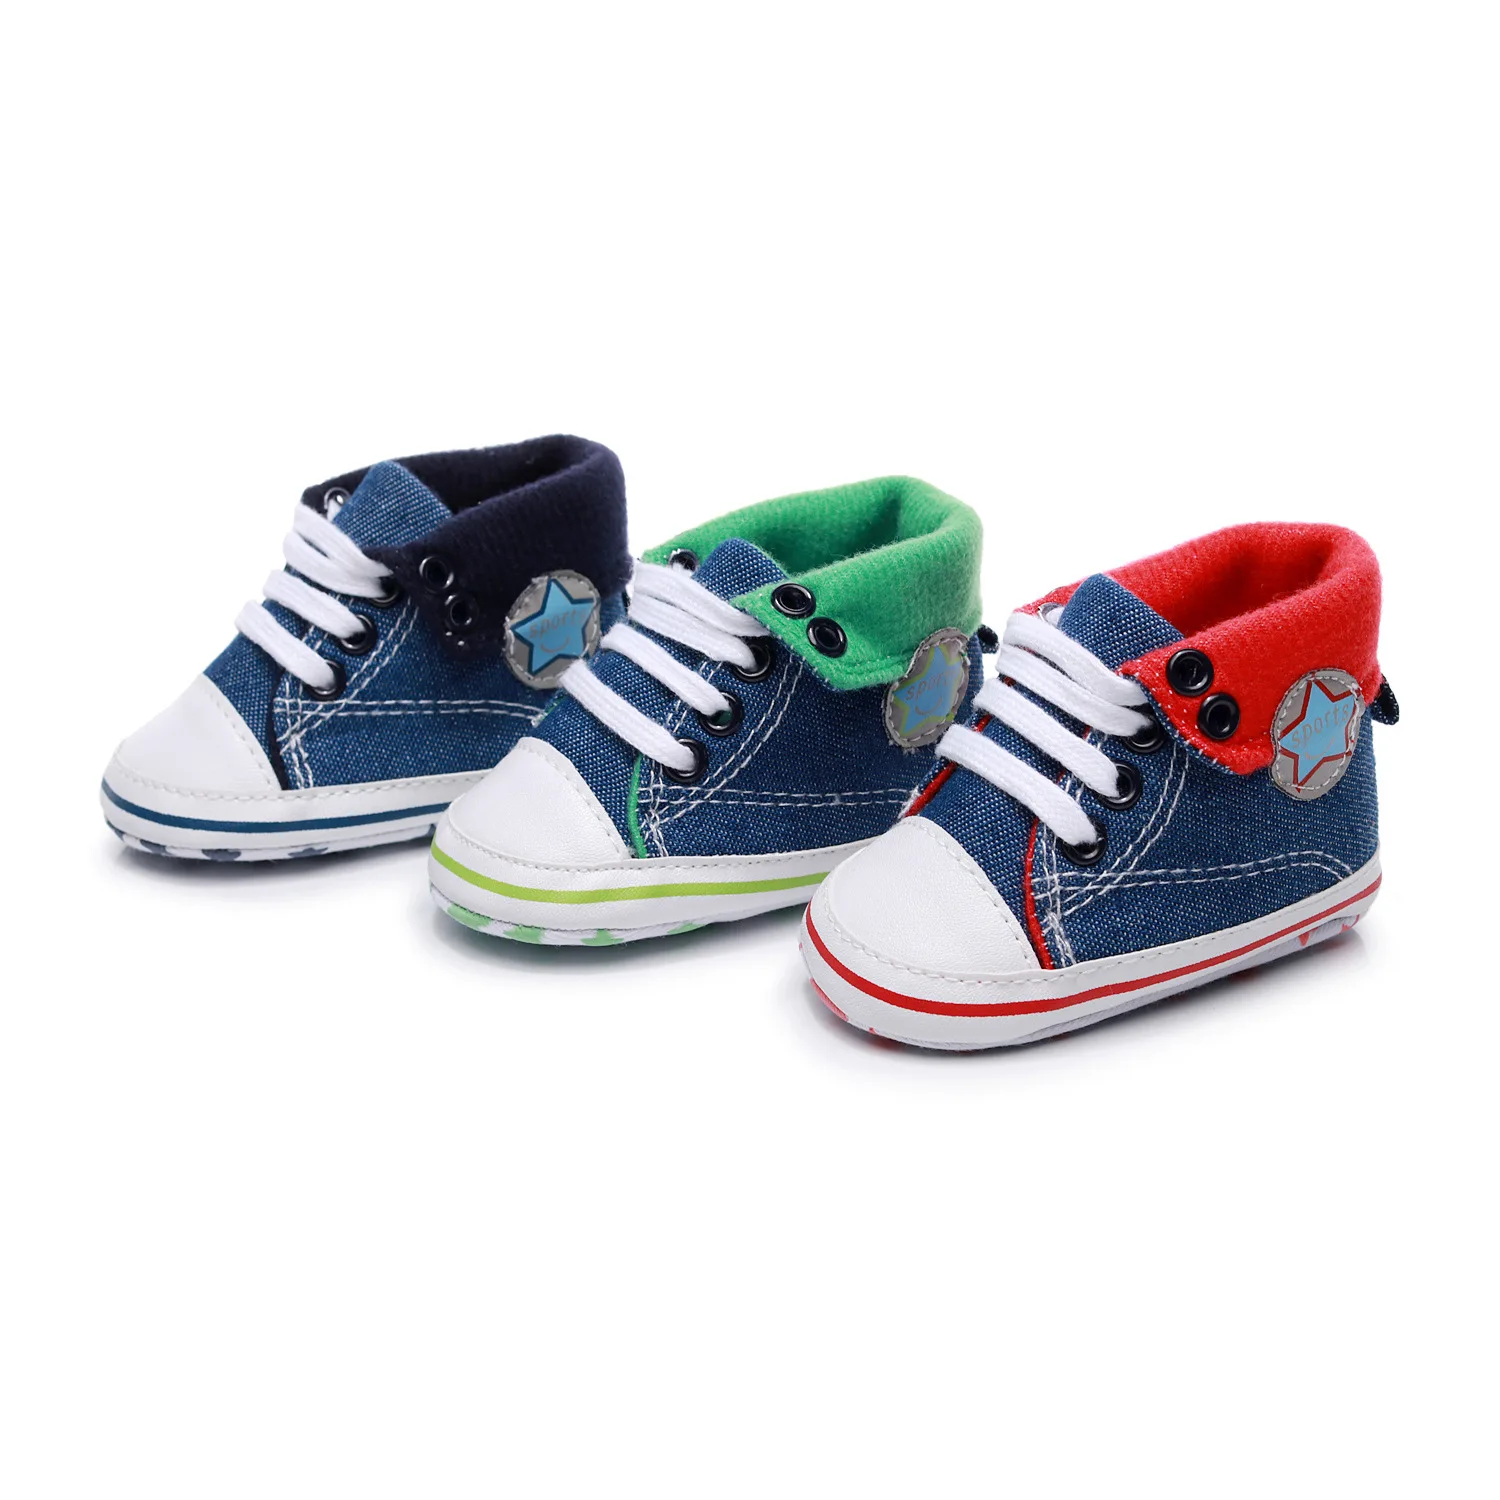 

Newborn Baby Shoes Infant first walkers Tollder Canvas Shoes Lace-up Baby Girls Sneaker Prewalker 0-18M